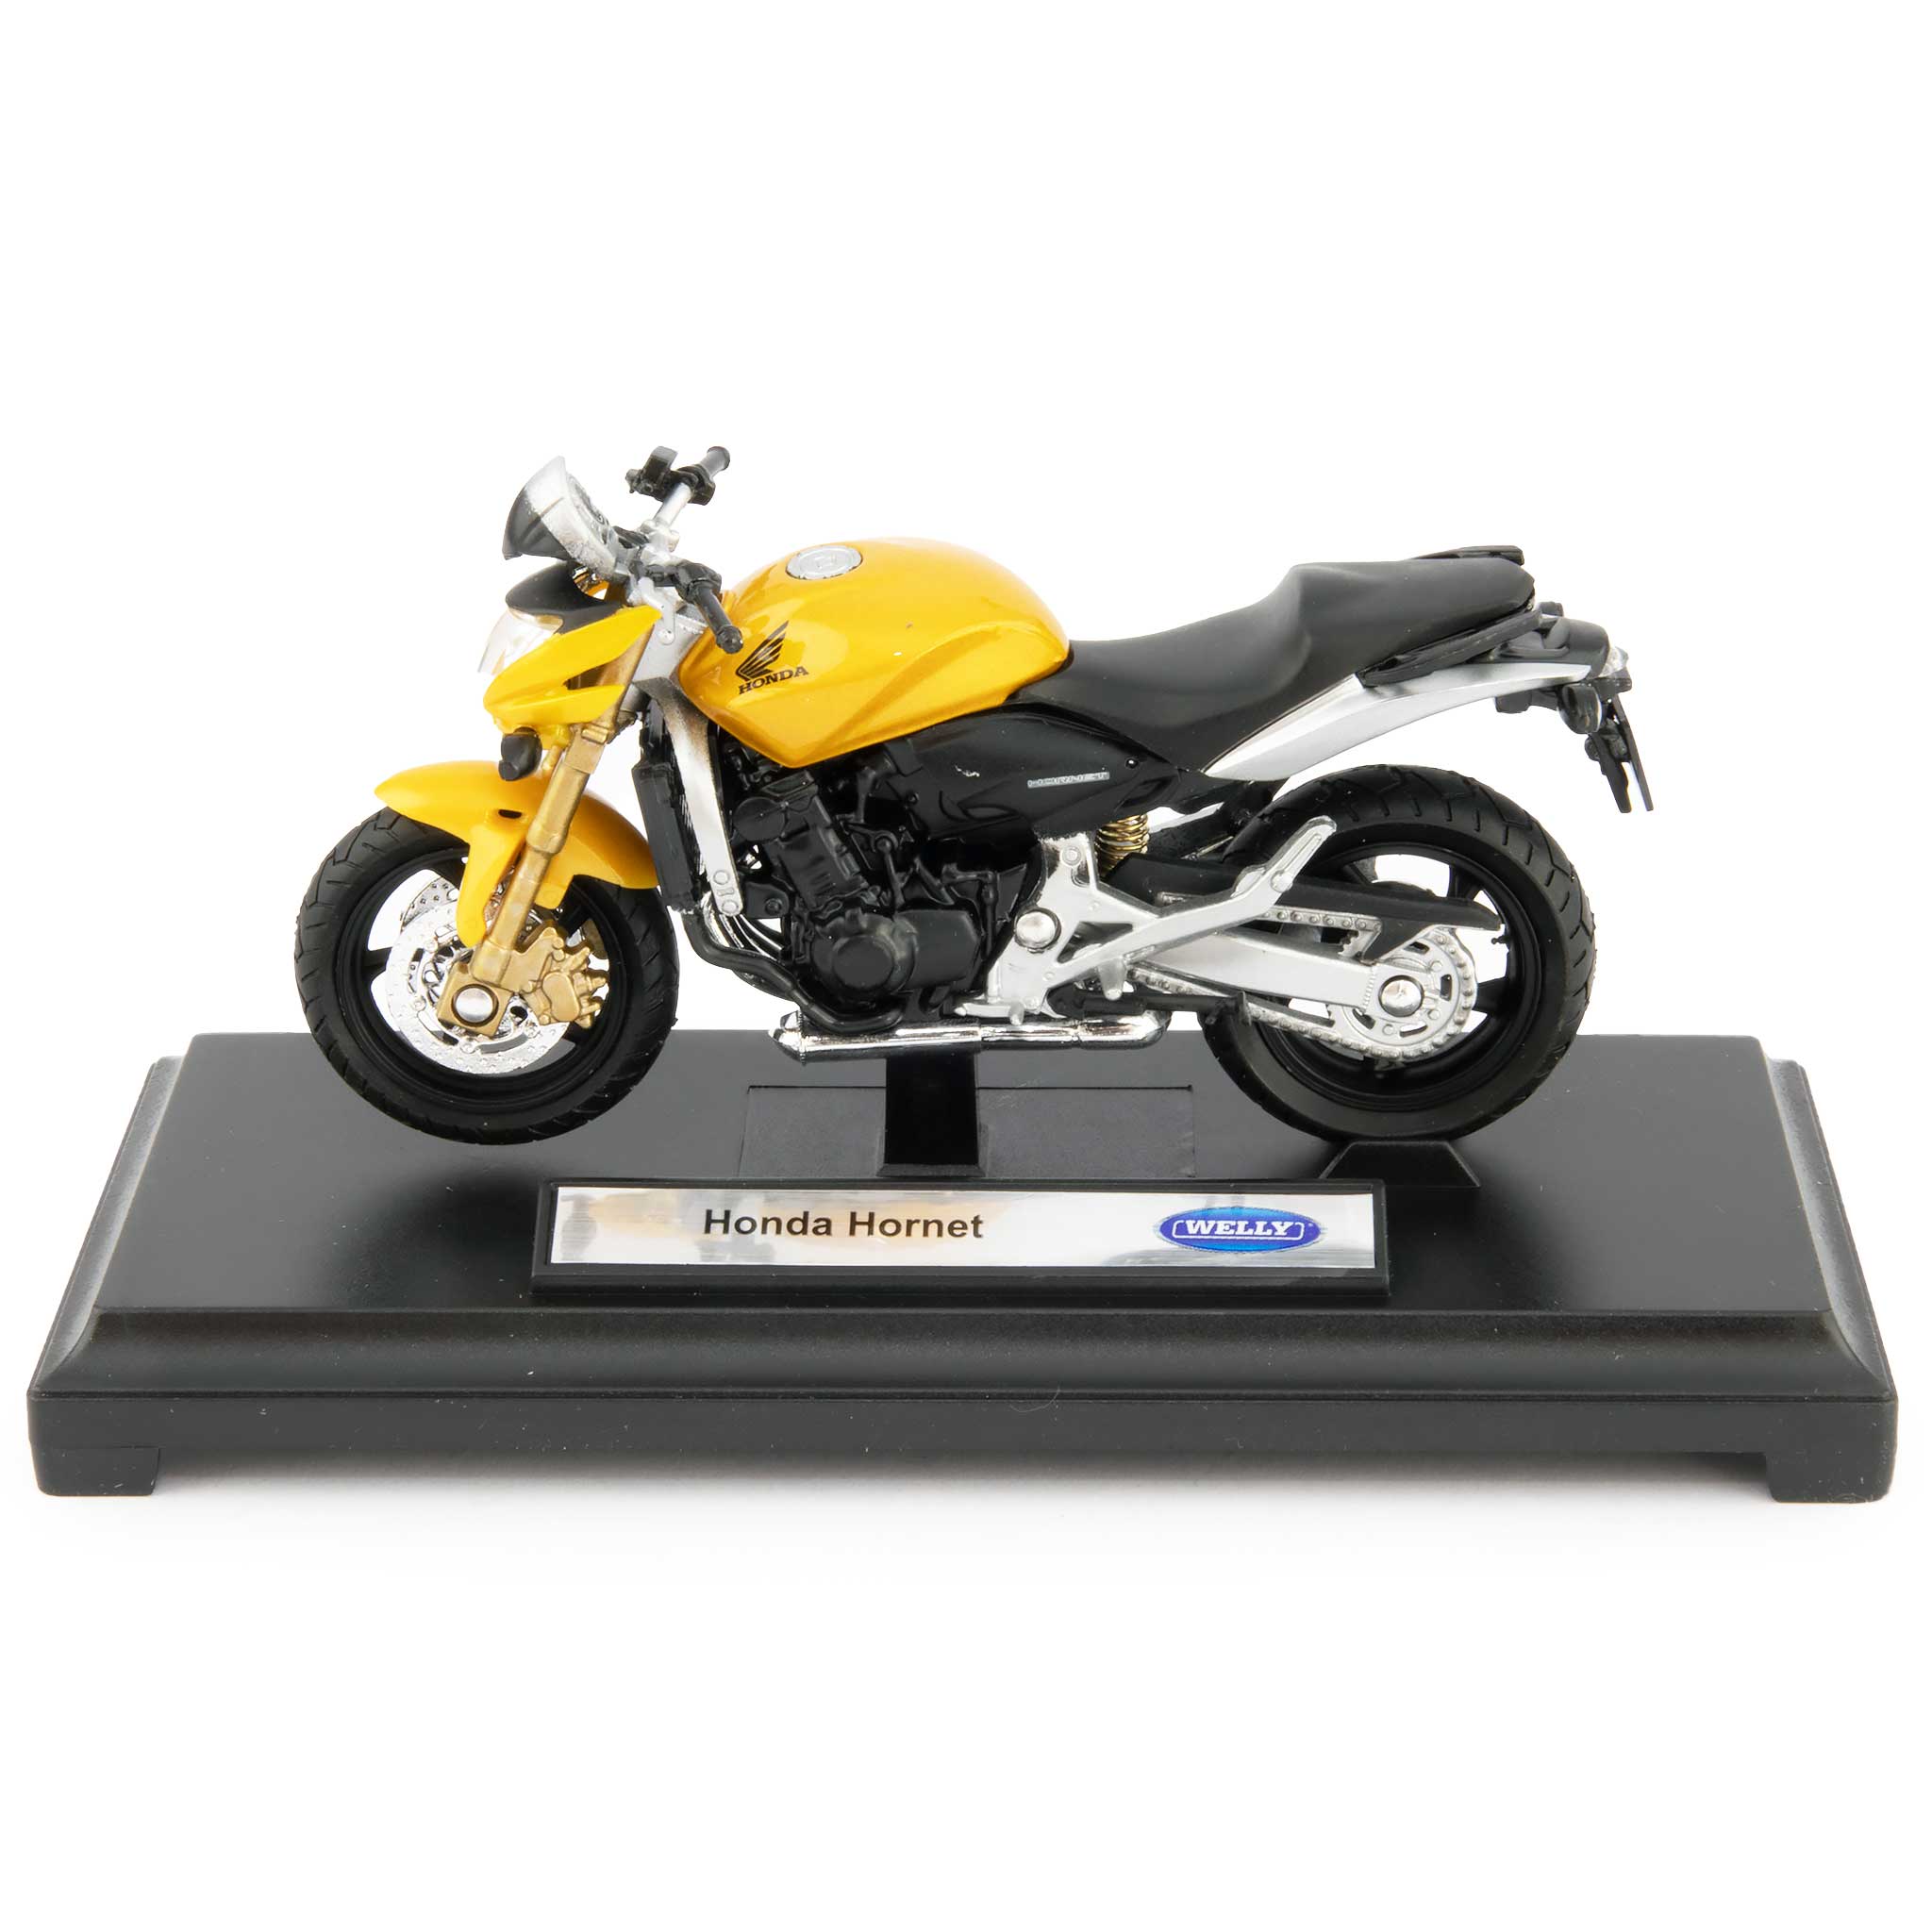 Honda Hornet Diecast Model Motorcycle yellow - 1:18 Scale-Welly-Diecast Model Centre